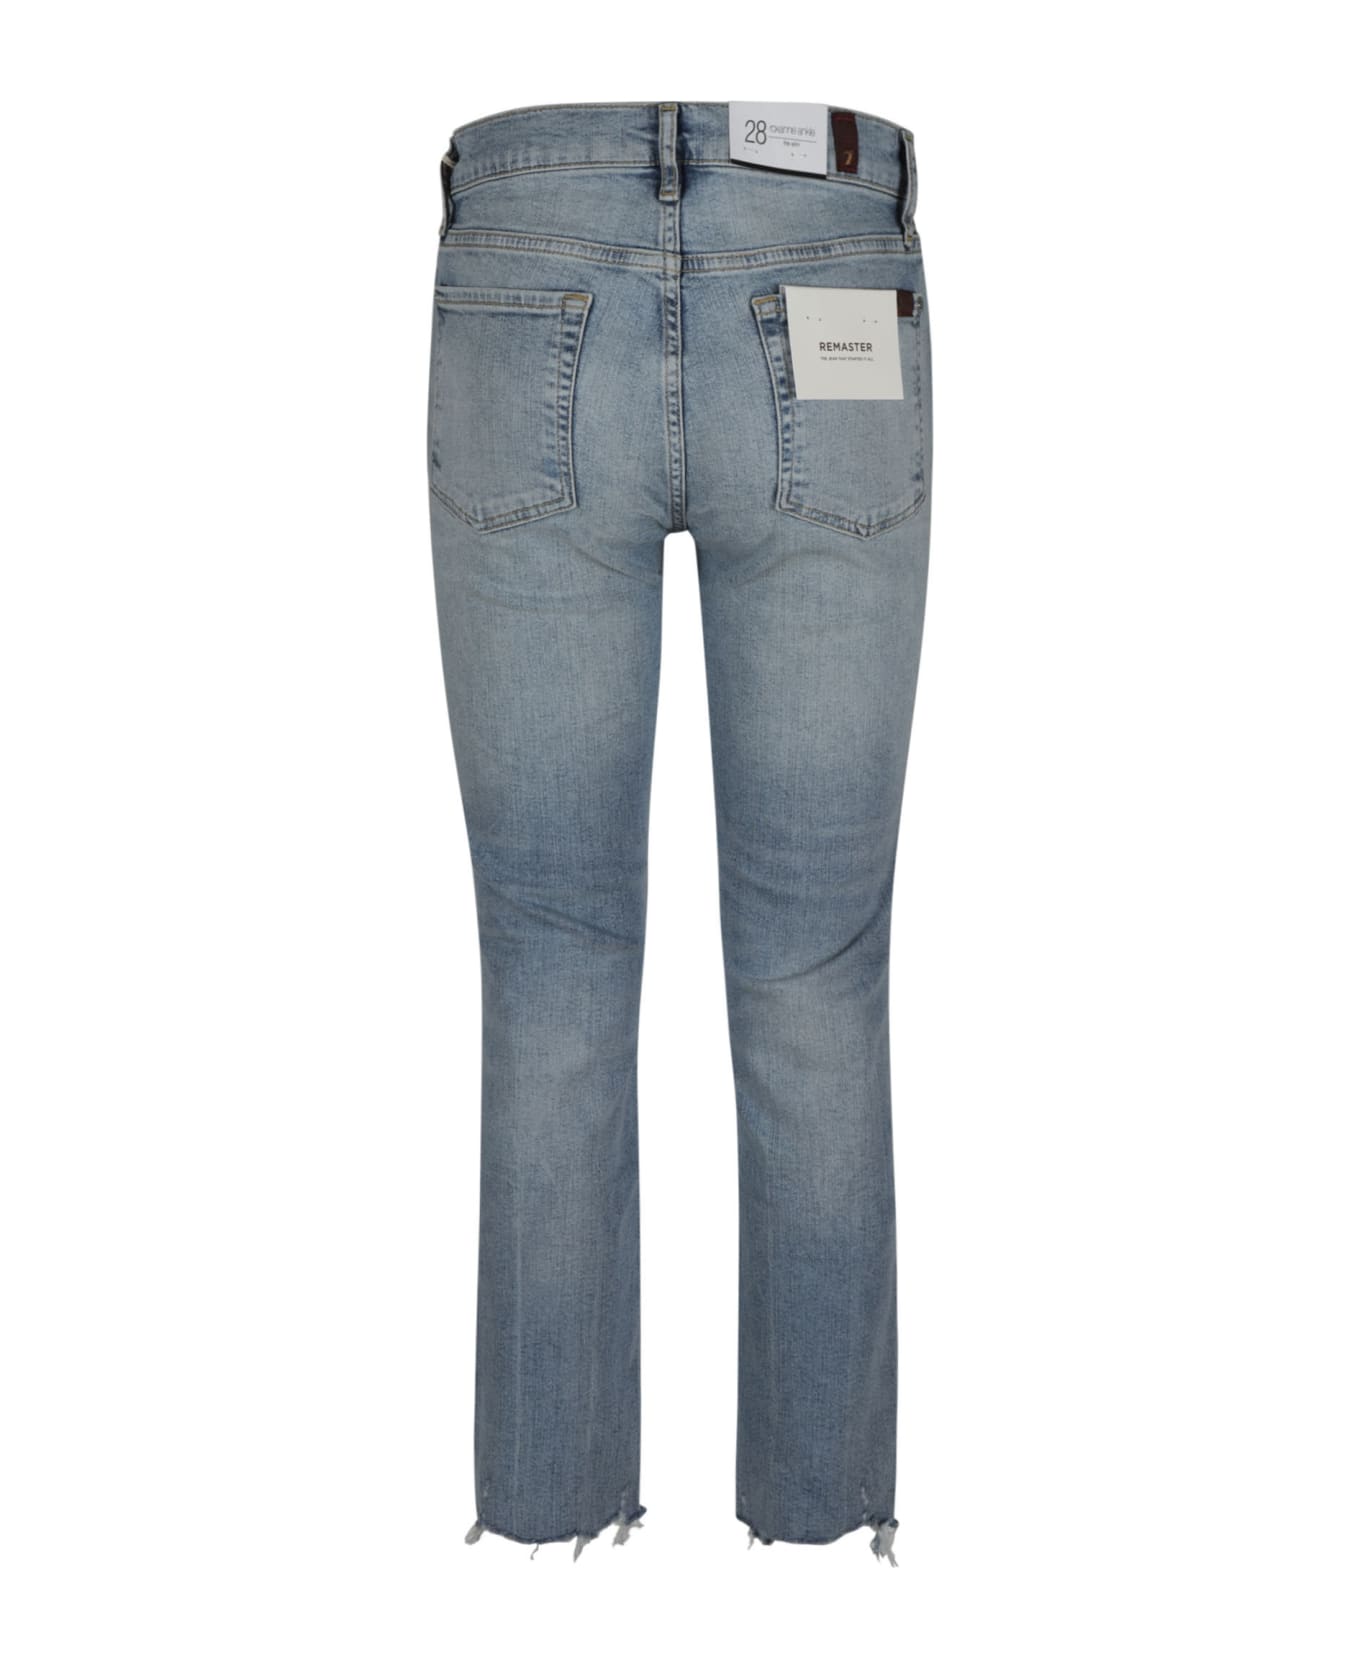 7 For All Mankind Roxanne Ankle Jeans - Blue Denim